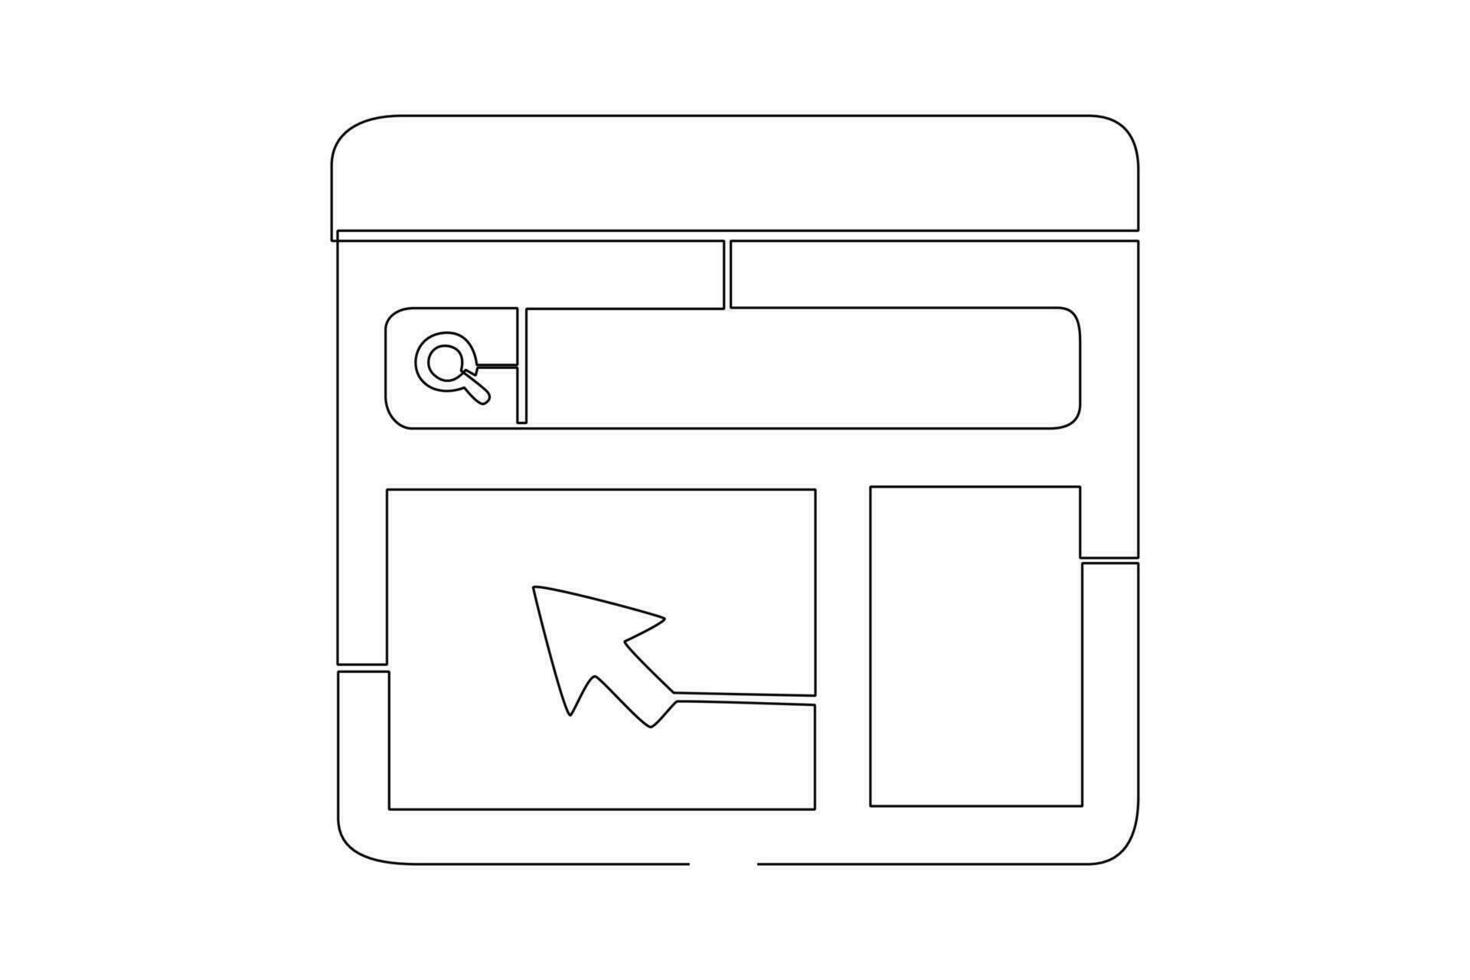 Continuous one line drawing Search web concept. Single line draw design vector graphic illustration.